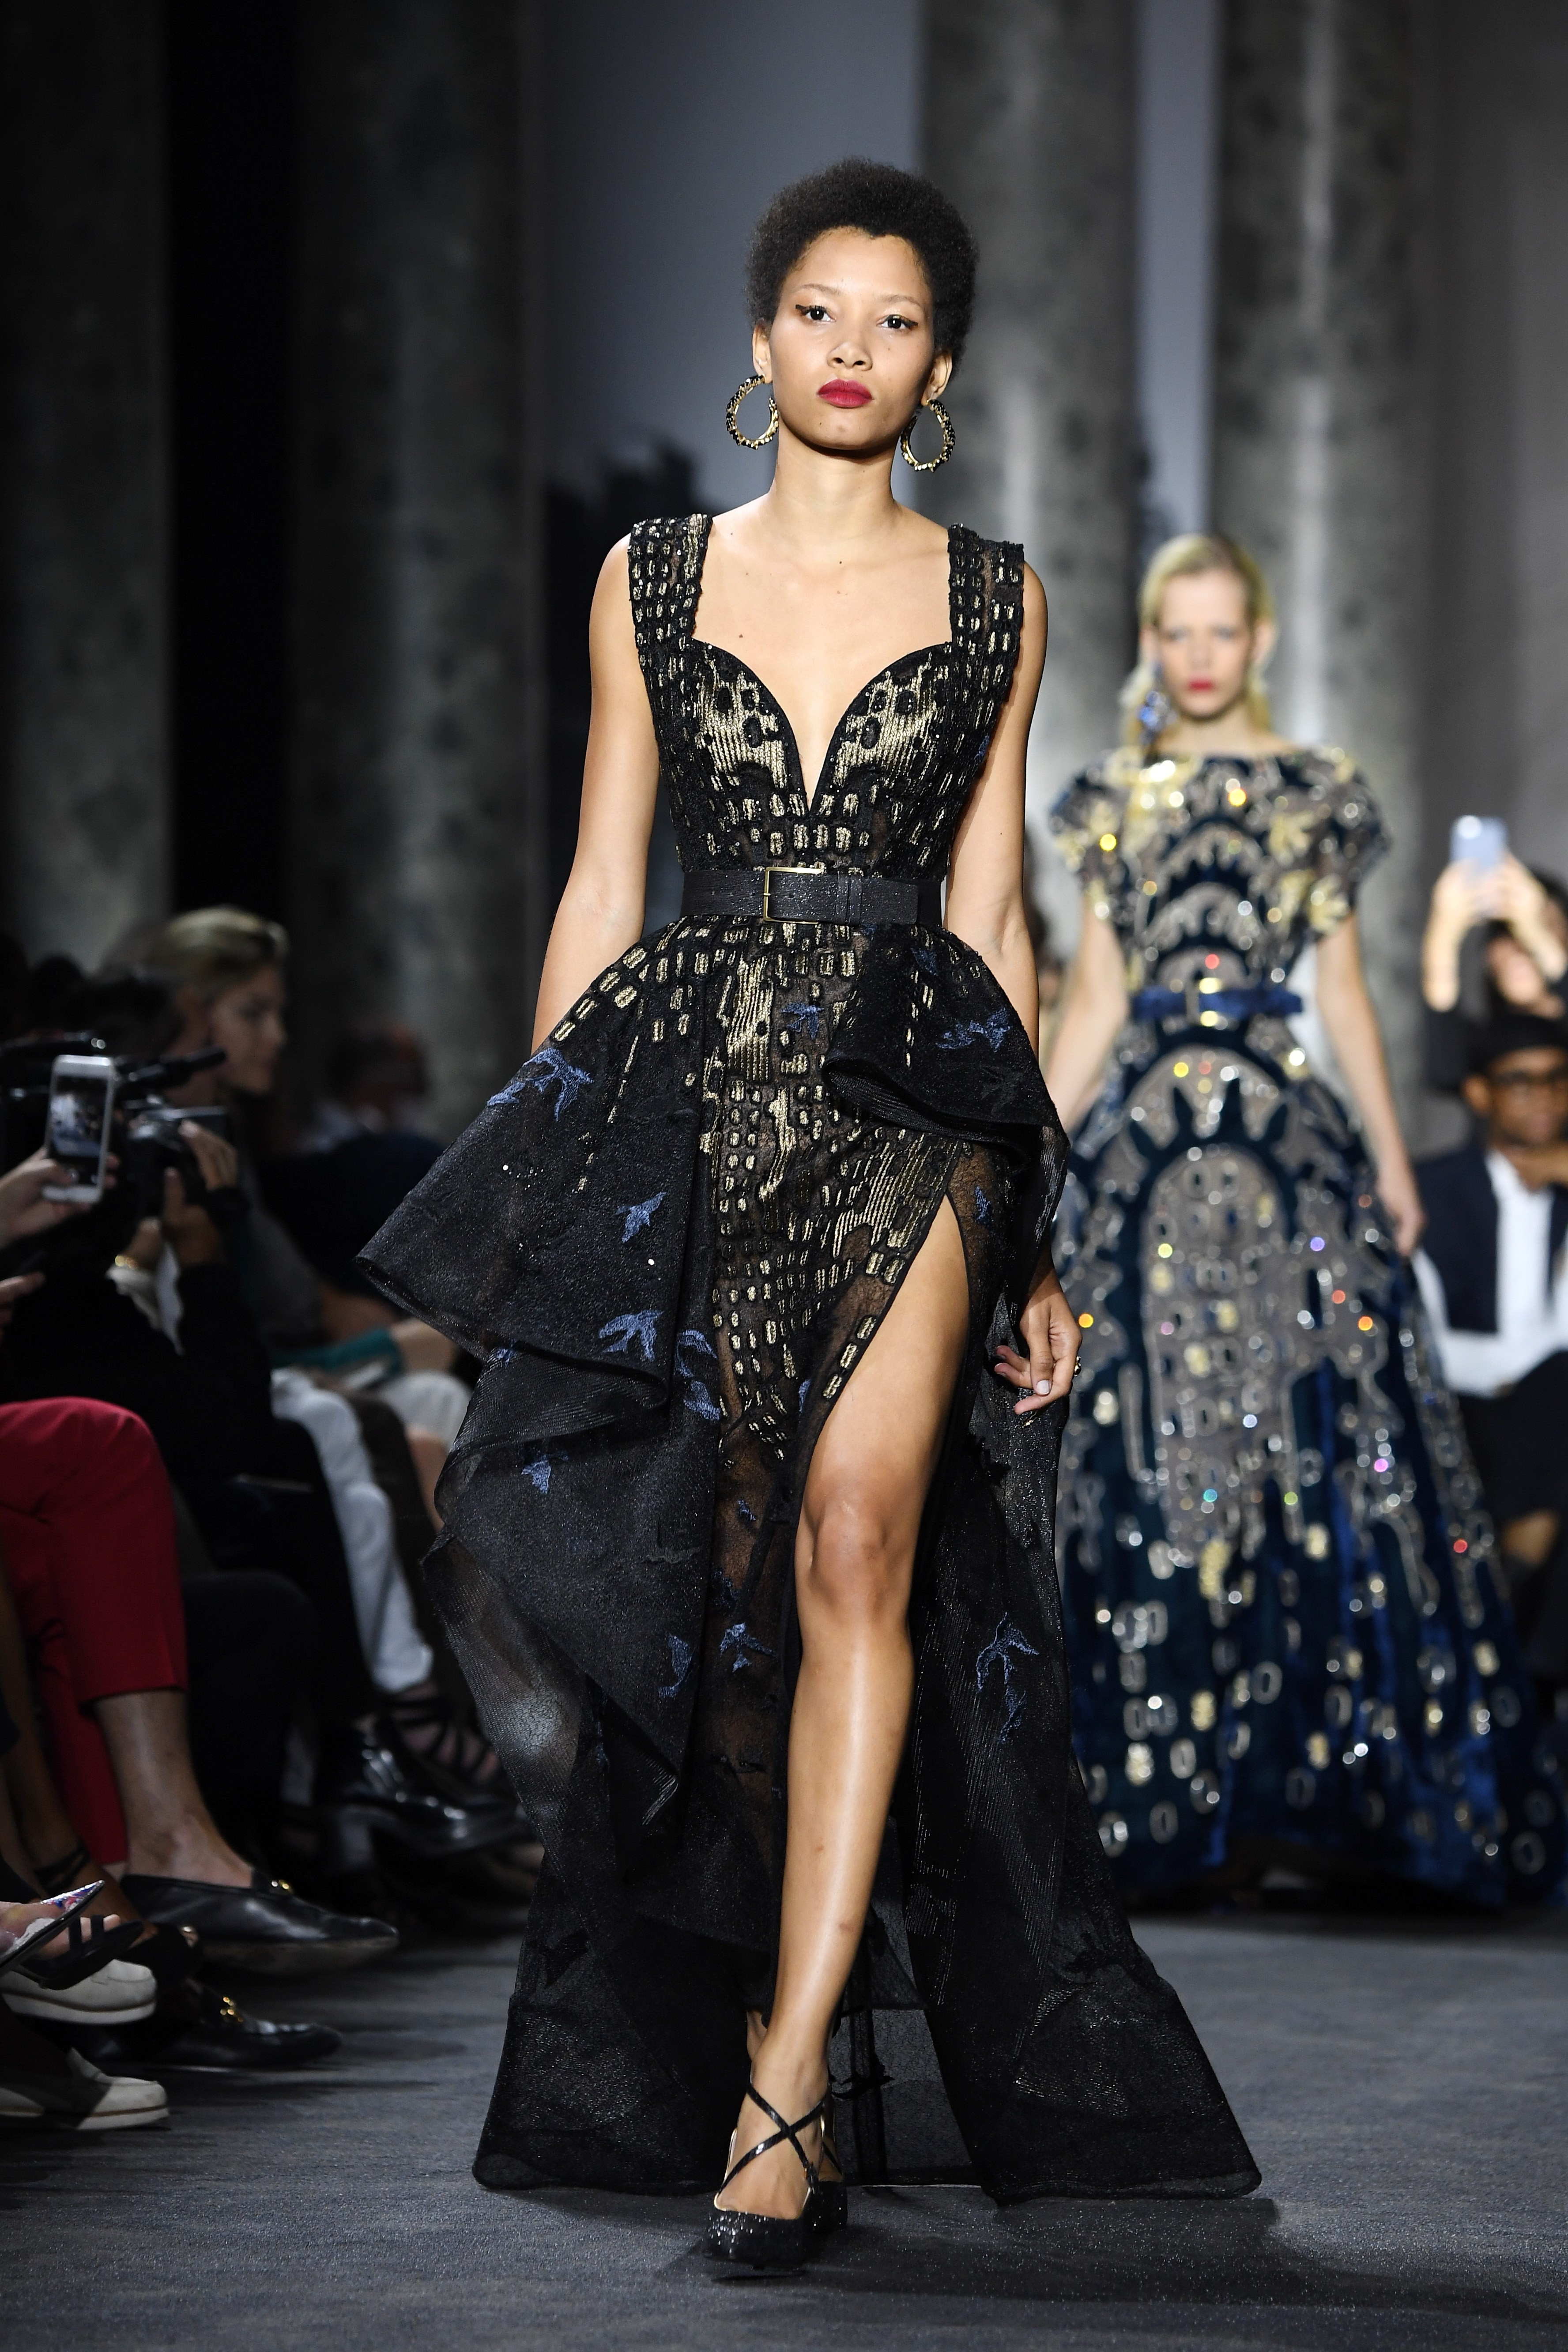 Couture gowns, Couture week, Glamorous dresses